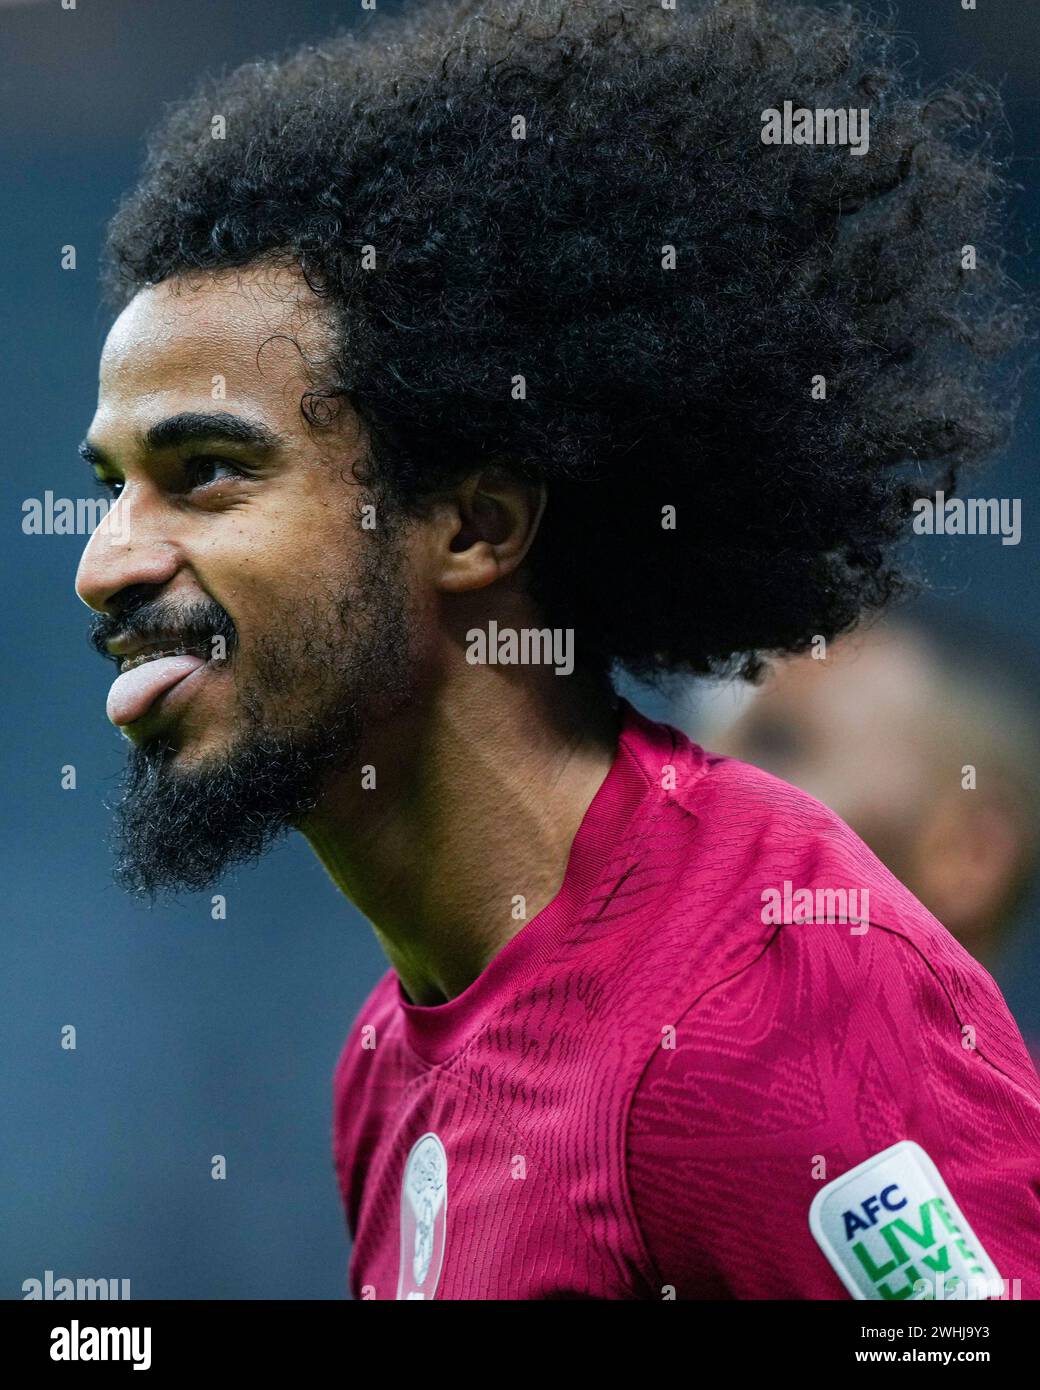 Qatar, Lusail, 10 February 2024 - Akram Afif of Qatar celebrates after scoring a goal during the AFC Asia Cup Final match between Jordan and Qatar at Lusail Stadium in Lusail, Qatar on 10 February 2024. Credit: Sebo47/Alamy Live News Stock Photo